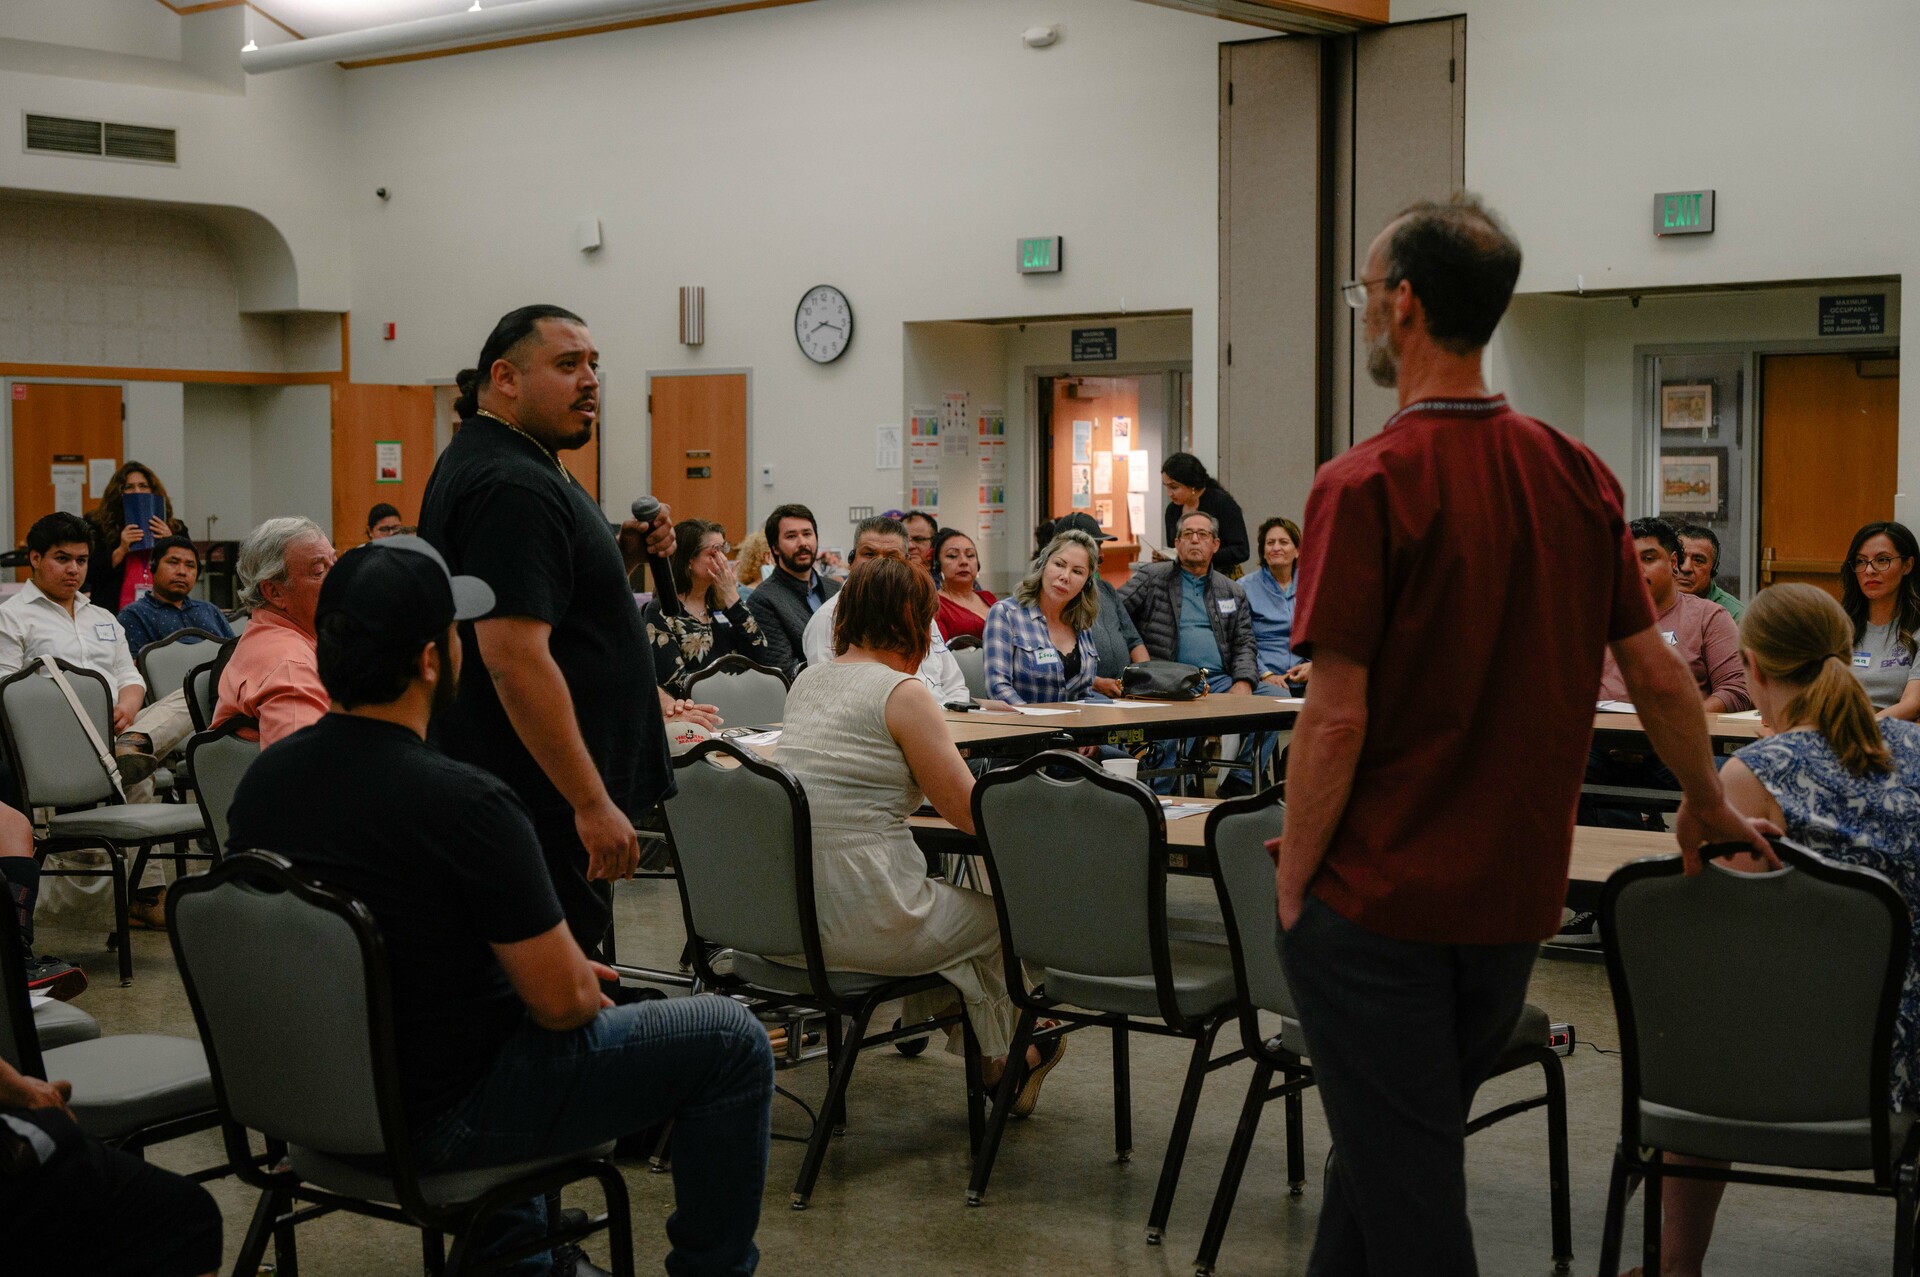 Two men are standing about six feet apart from each other in a crowded room with a seated audience. They attend a city meeting and are speaking to each other.